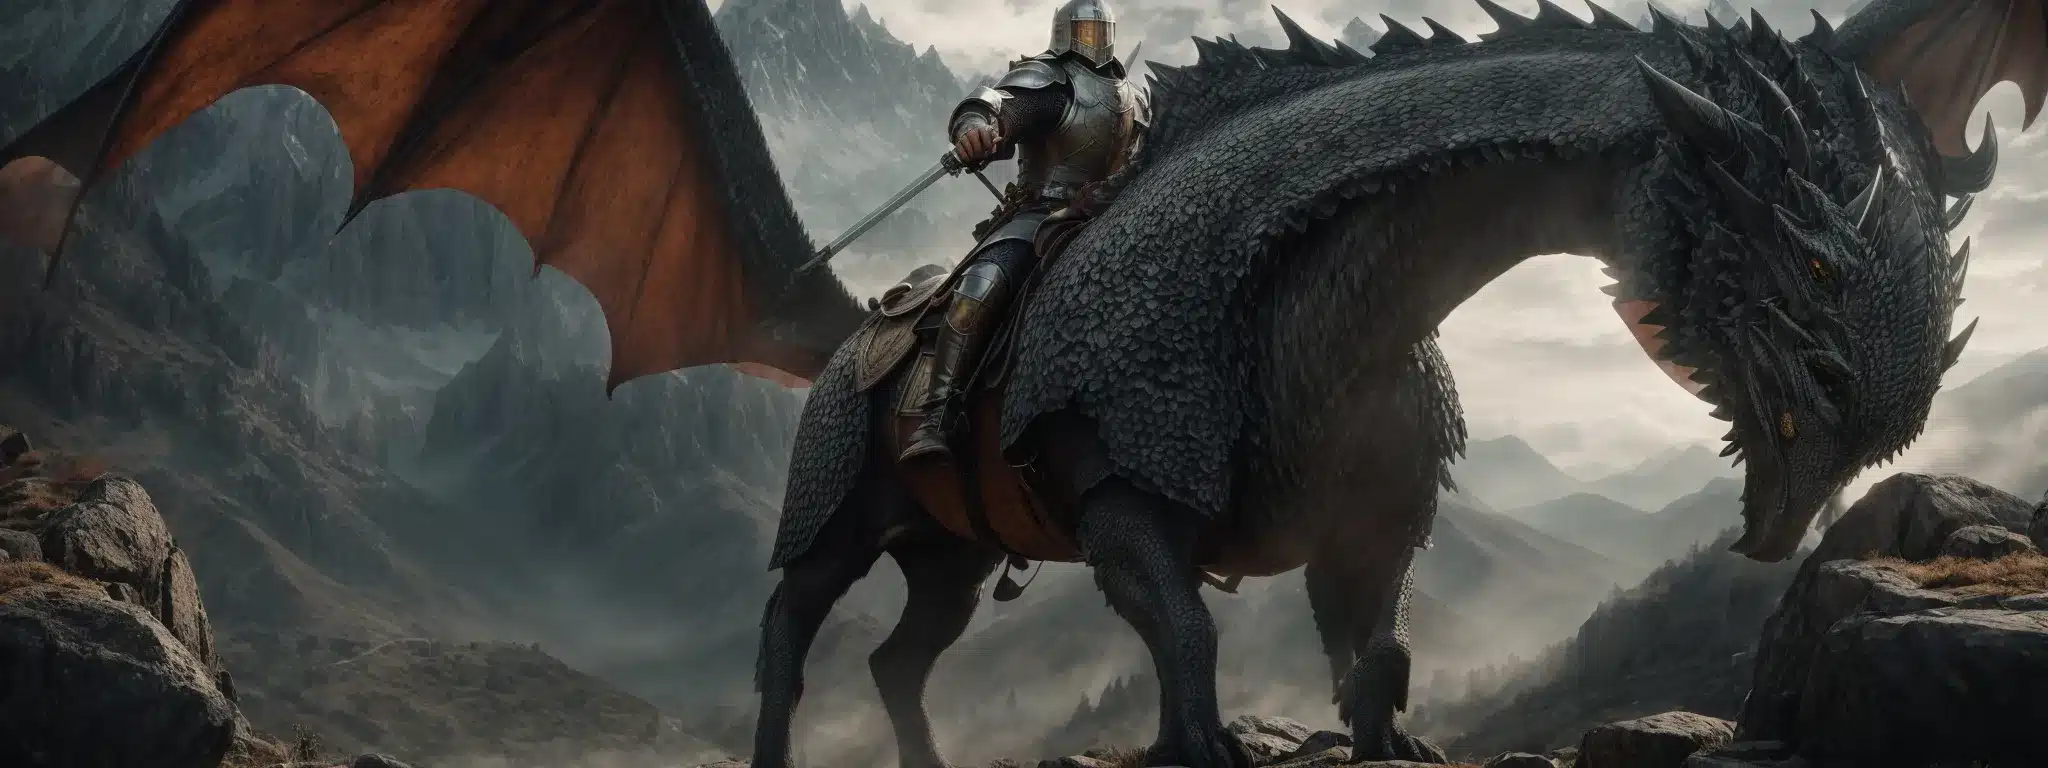 A Knight With A Shield, Embarking On A Mountainous Quest, Accompanied By Dragons Symbolizing Relevance, Proximity, And Prominence In A Digital Landscape.